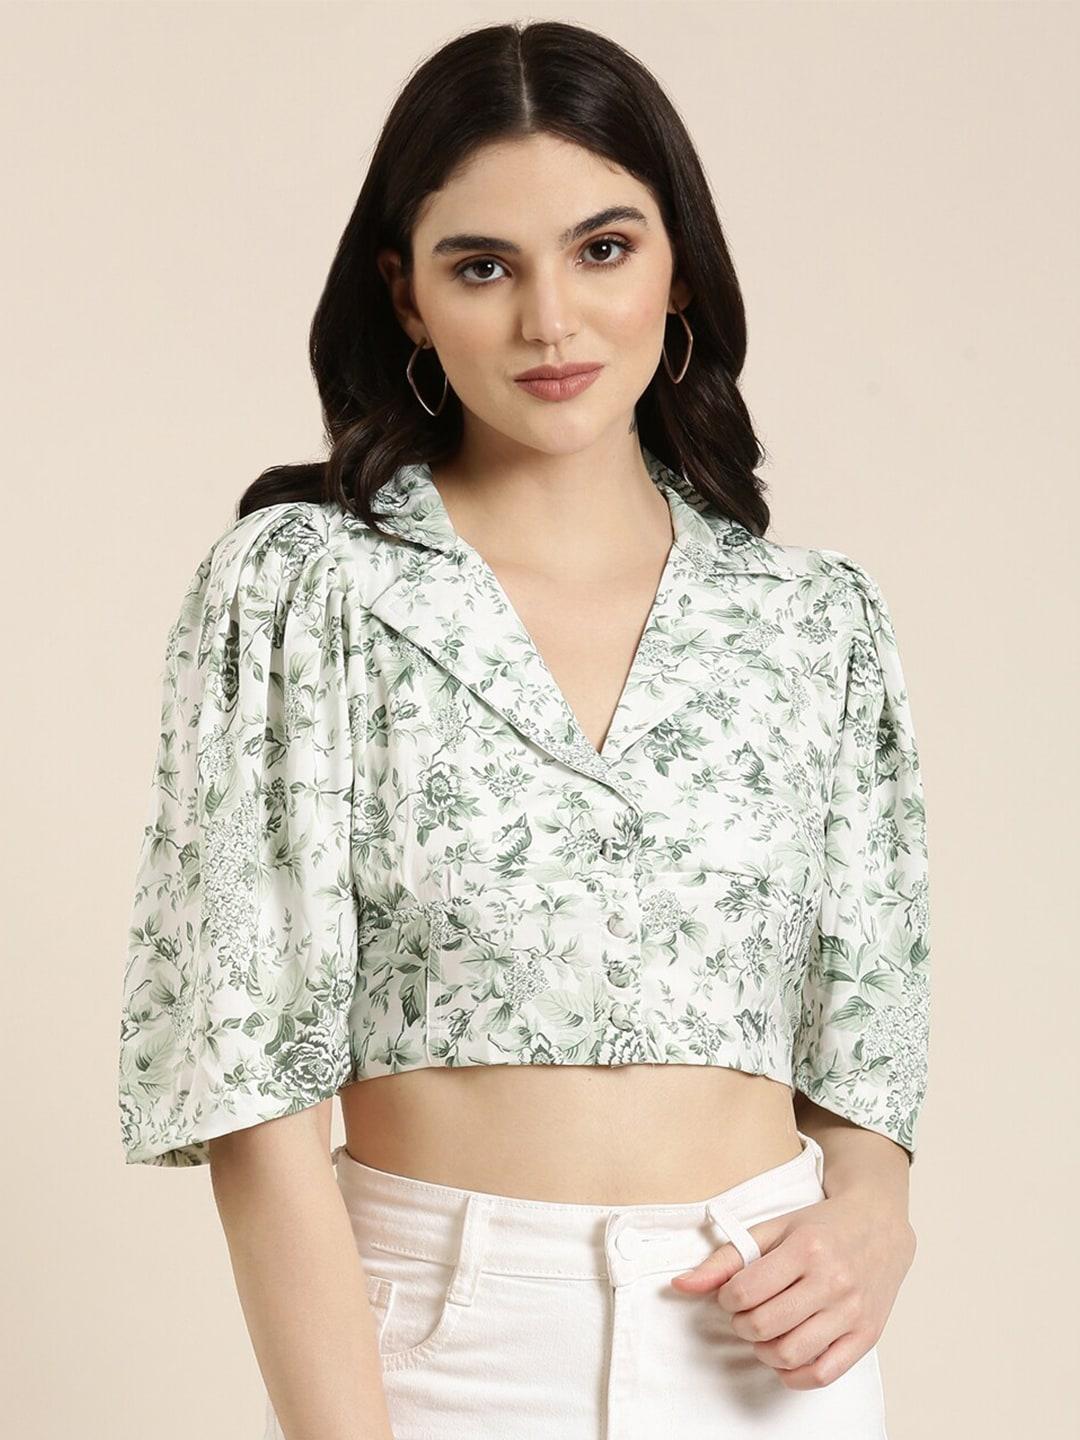 showoff-floral-printed-puff-sleeves-shirt-style-crop-top